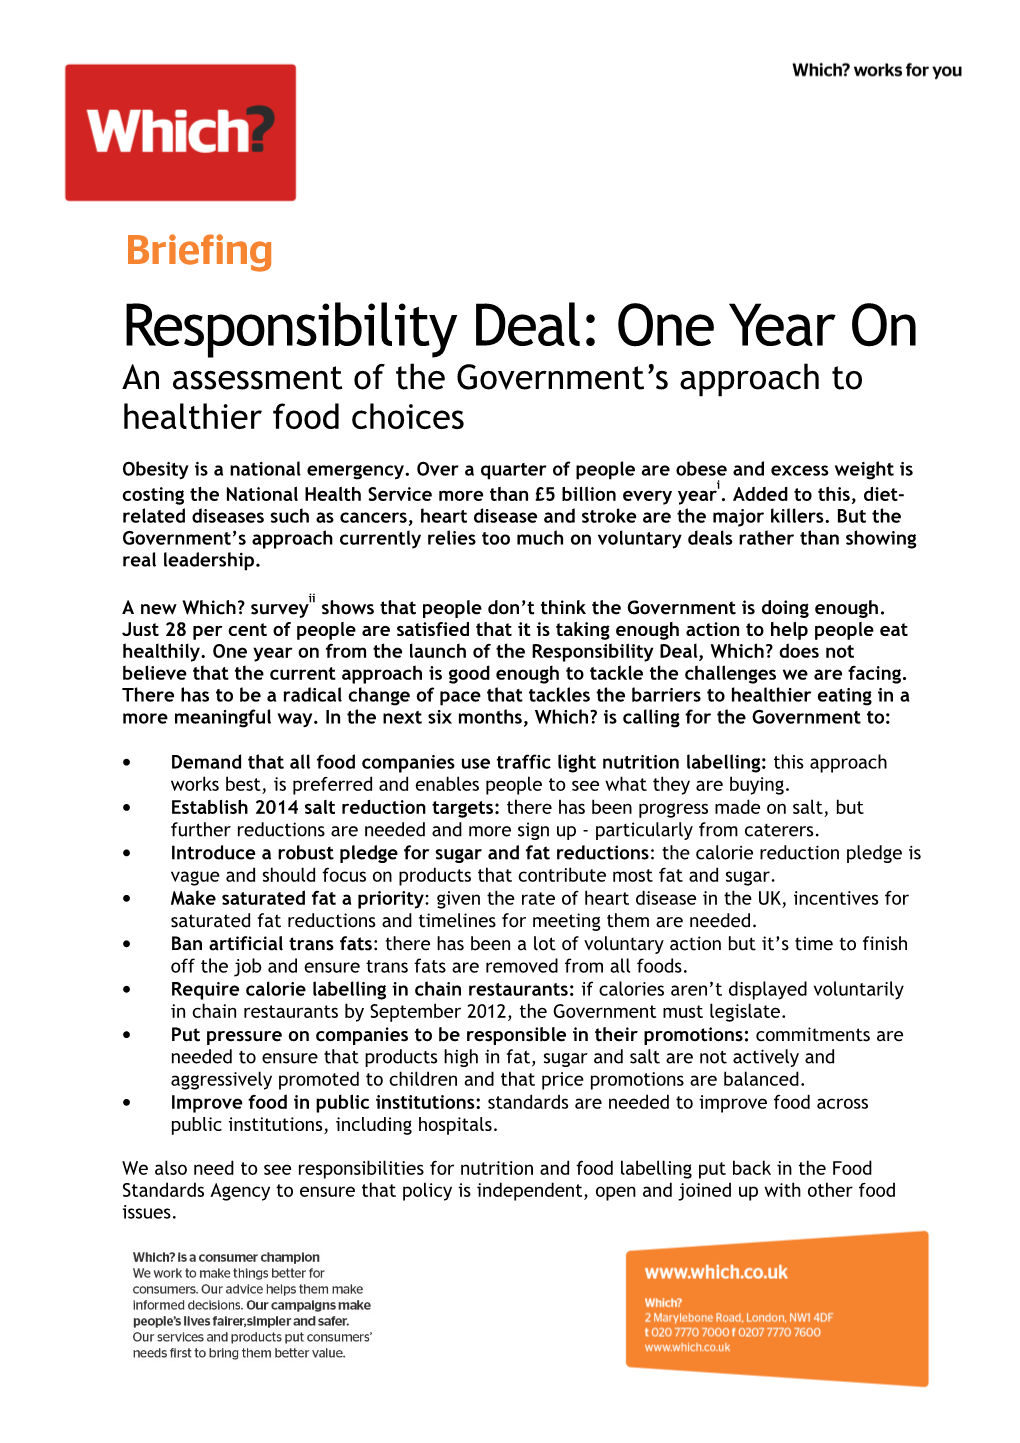 Responsibility Deal: One Year on an Assessment of the Government’S Approach to Healthier Food Choices